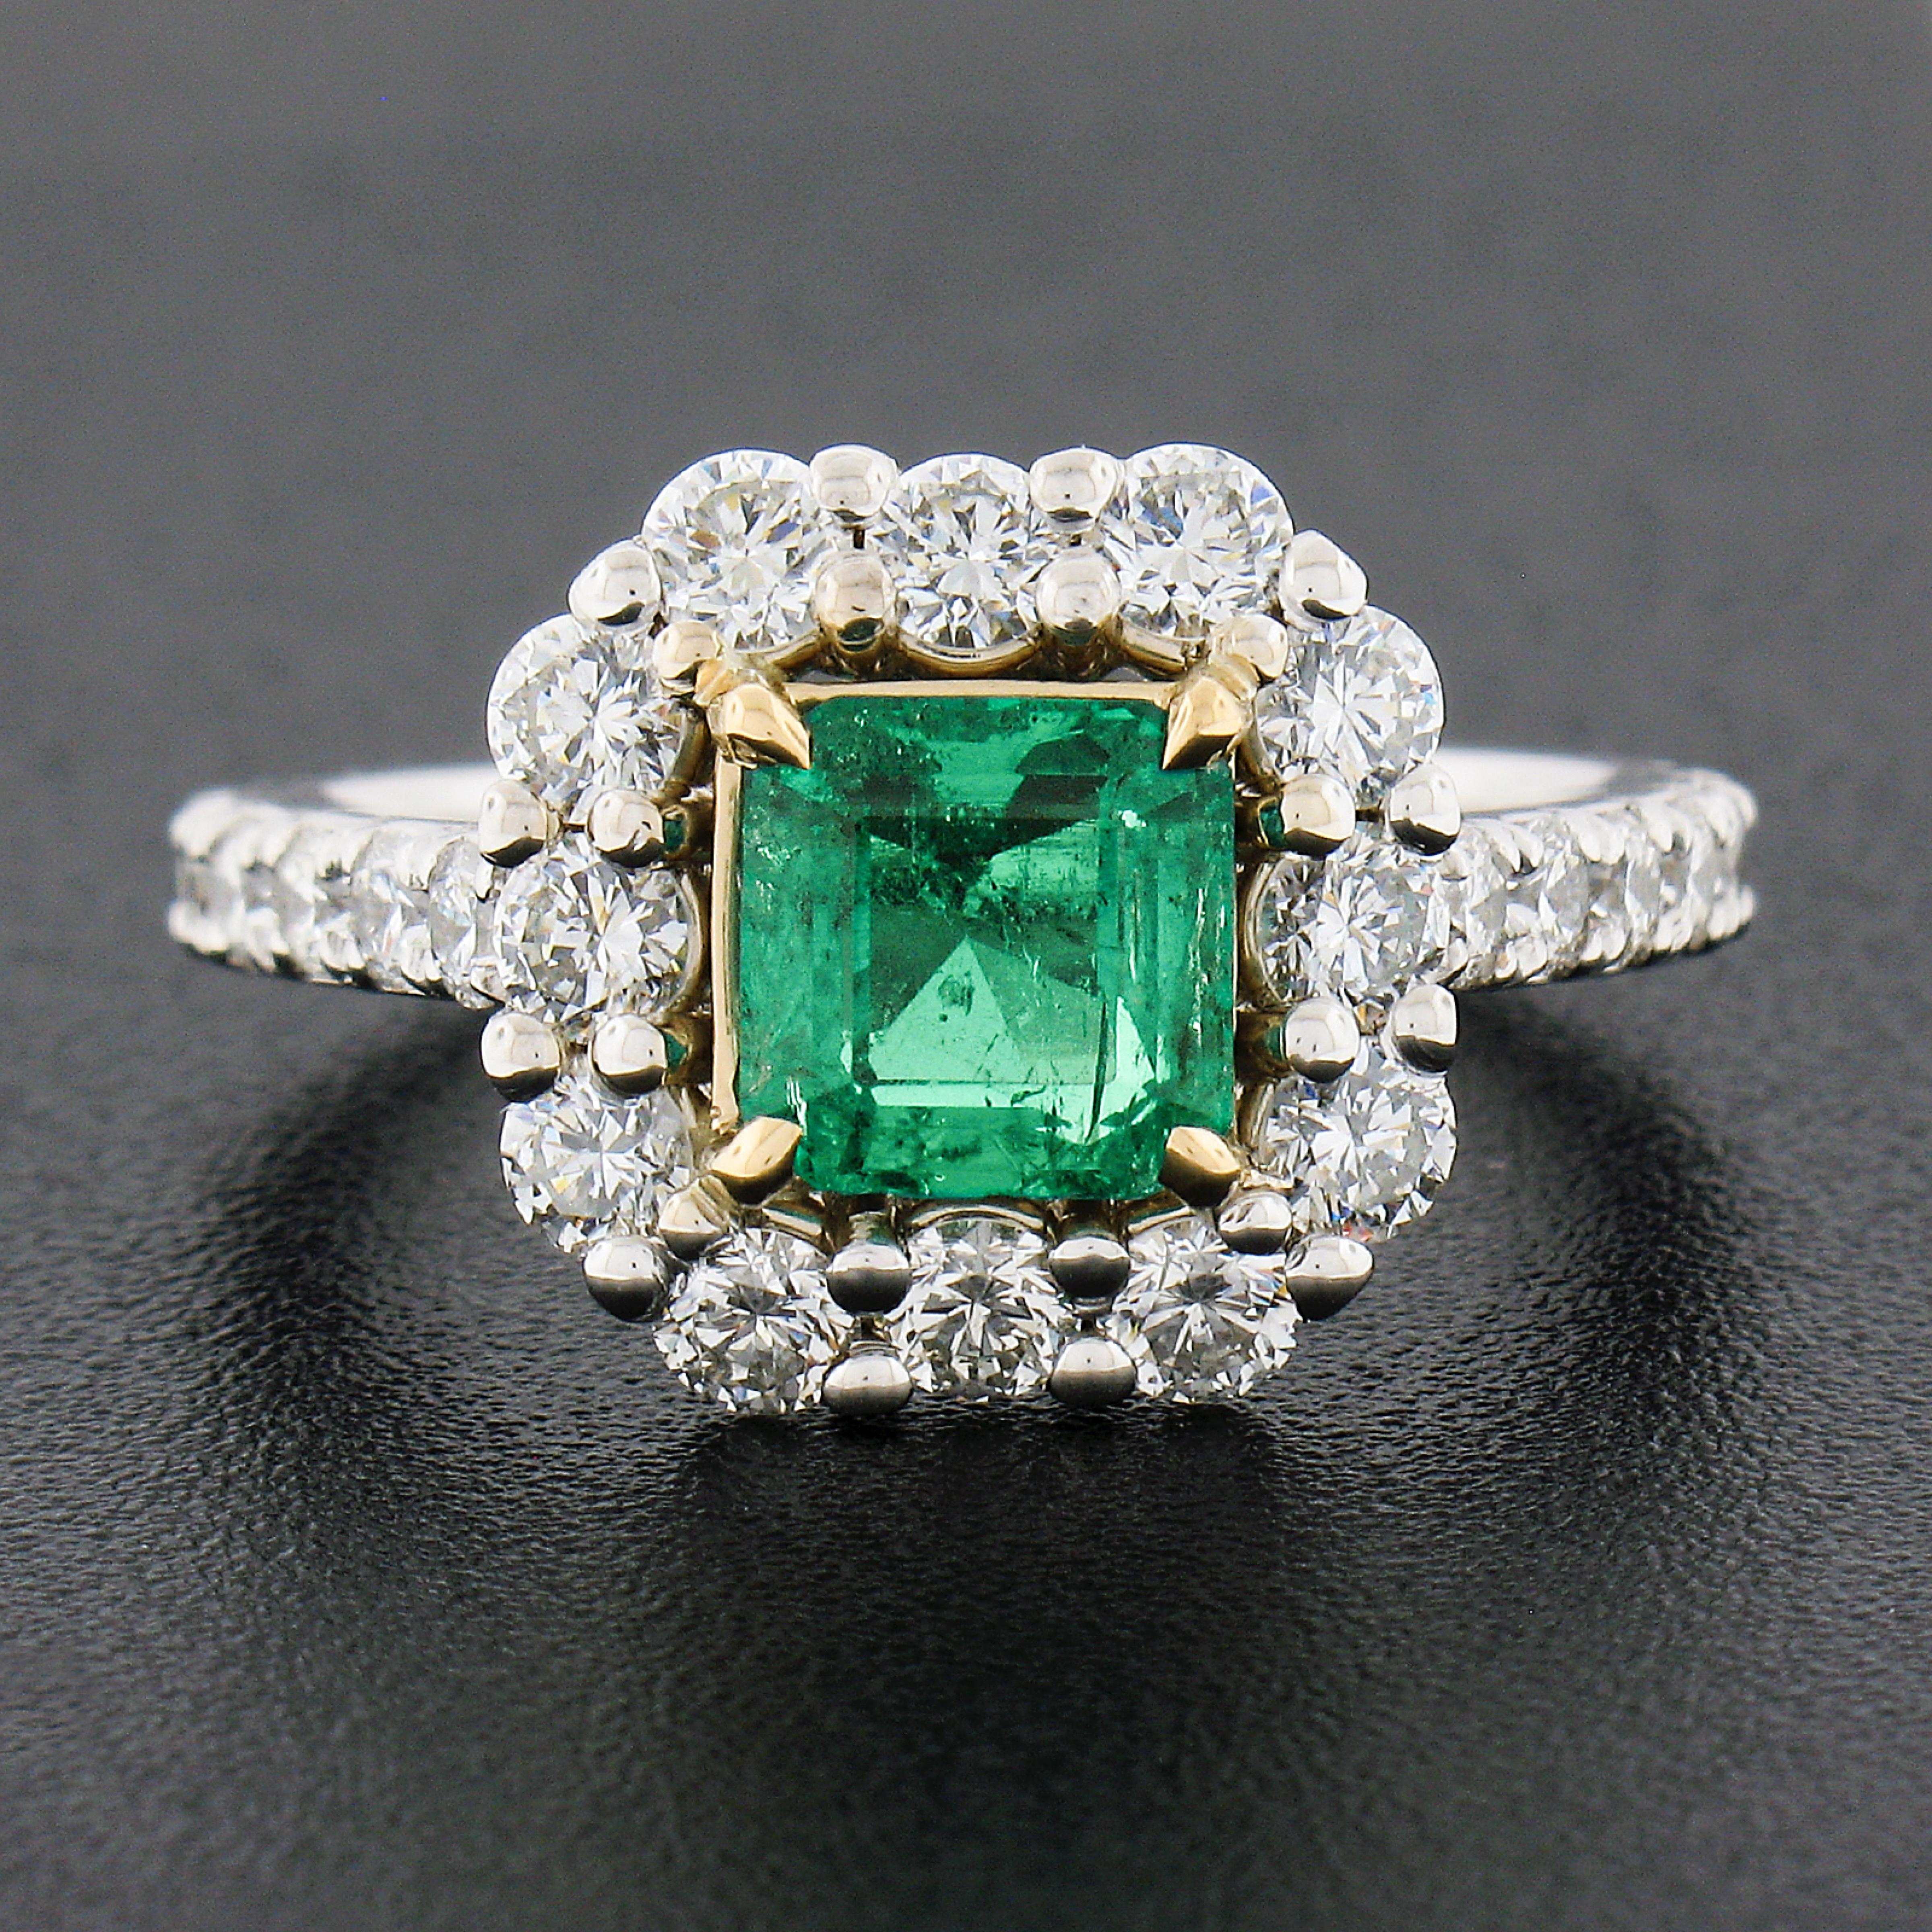 Here we have an absolutely gorgeous, brand new, emerald and diamond cocktail ring crafted in solid 18k white and yellow gold. The ring features a beautiful, GIA certified, natural emerald stone that displays an incredible vivid green color, prong